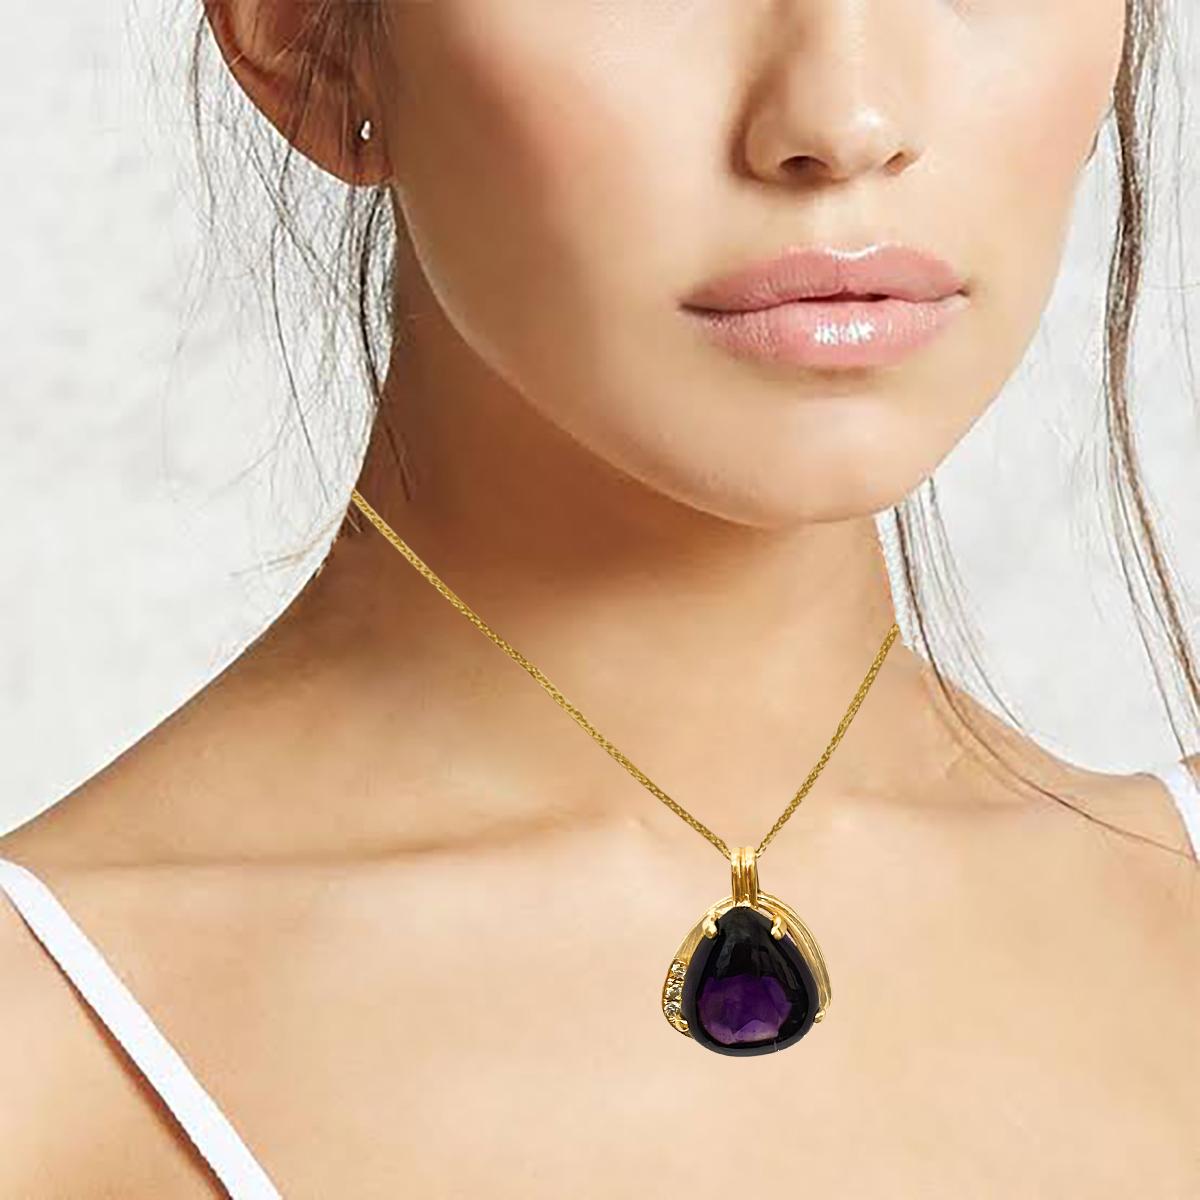 10 Carat Tear Drop Amethyst and Diamonds Pendent Necklace 18 Karat Yellow Gold In Excellent Condition For Sale In New York, NY